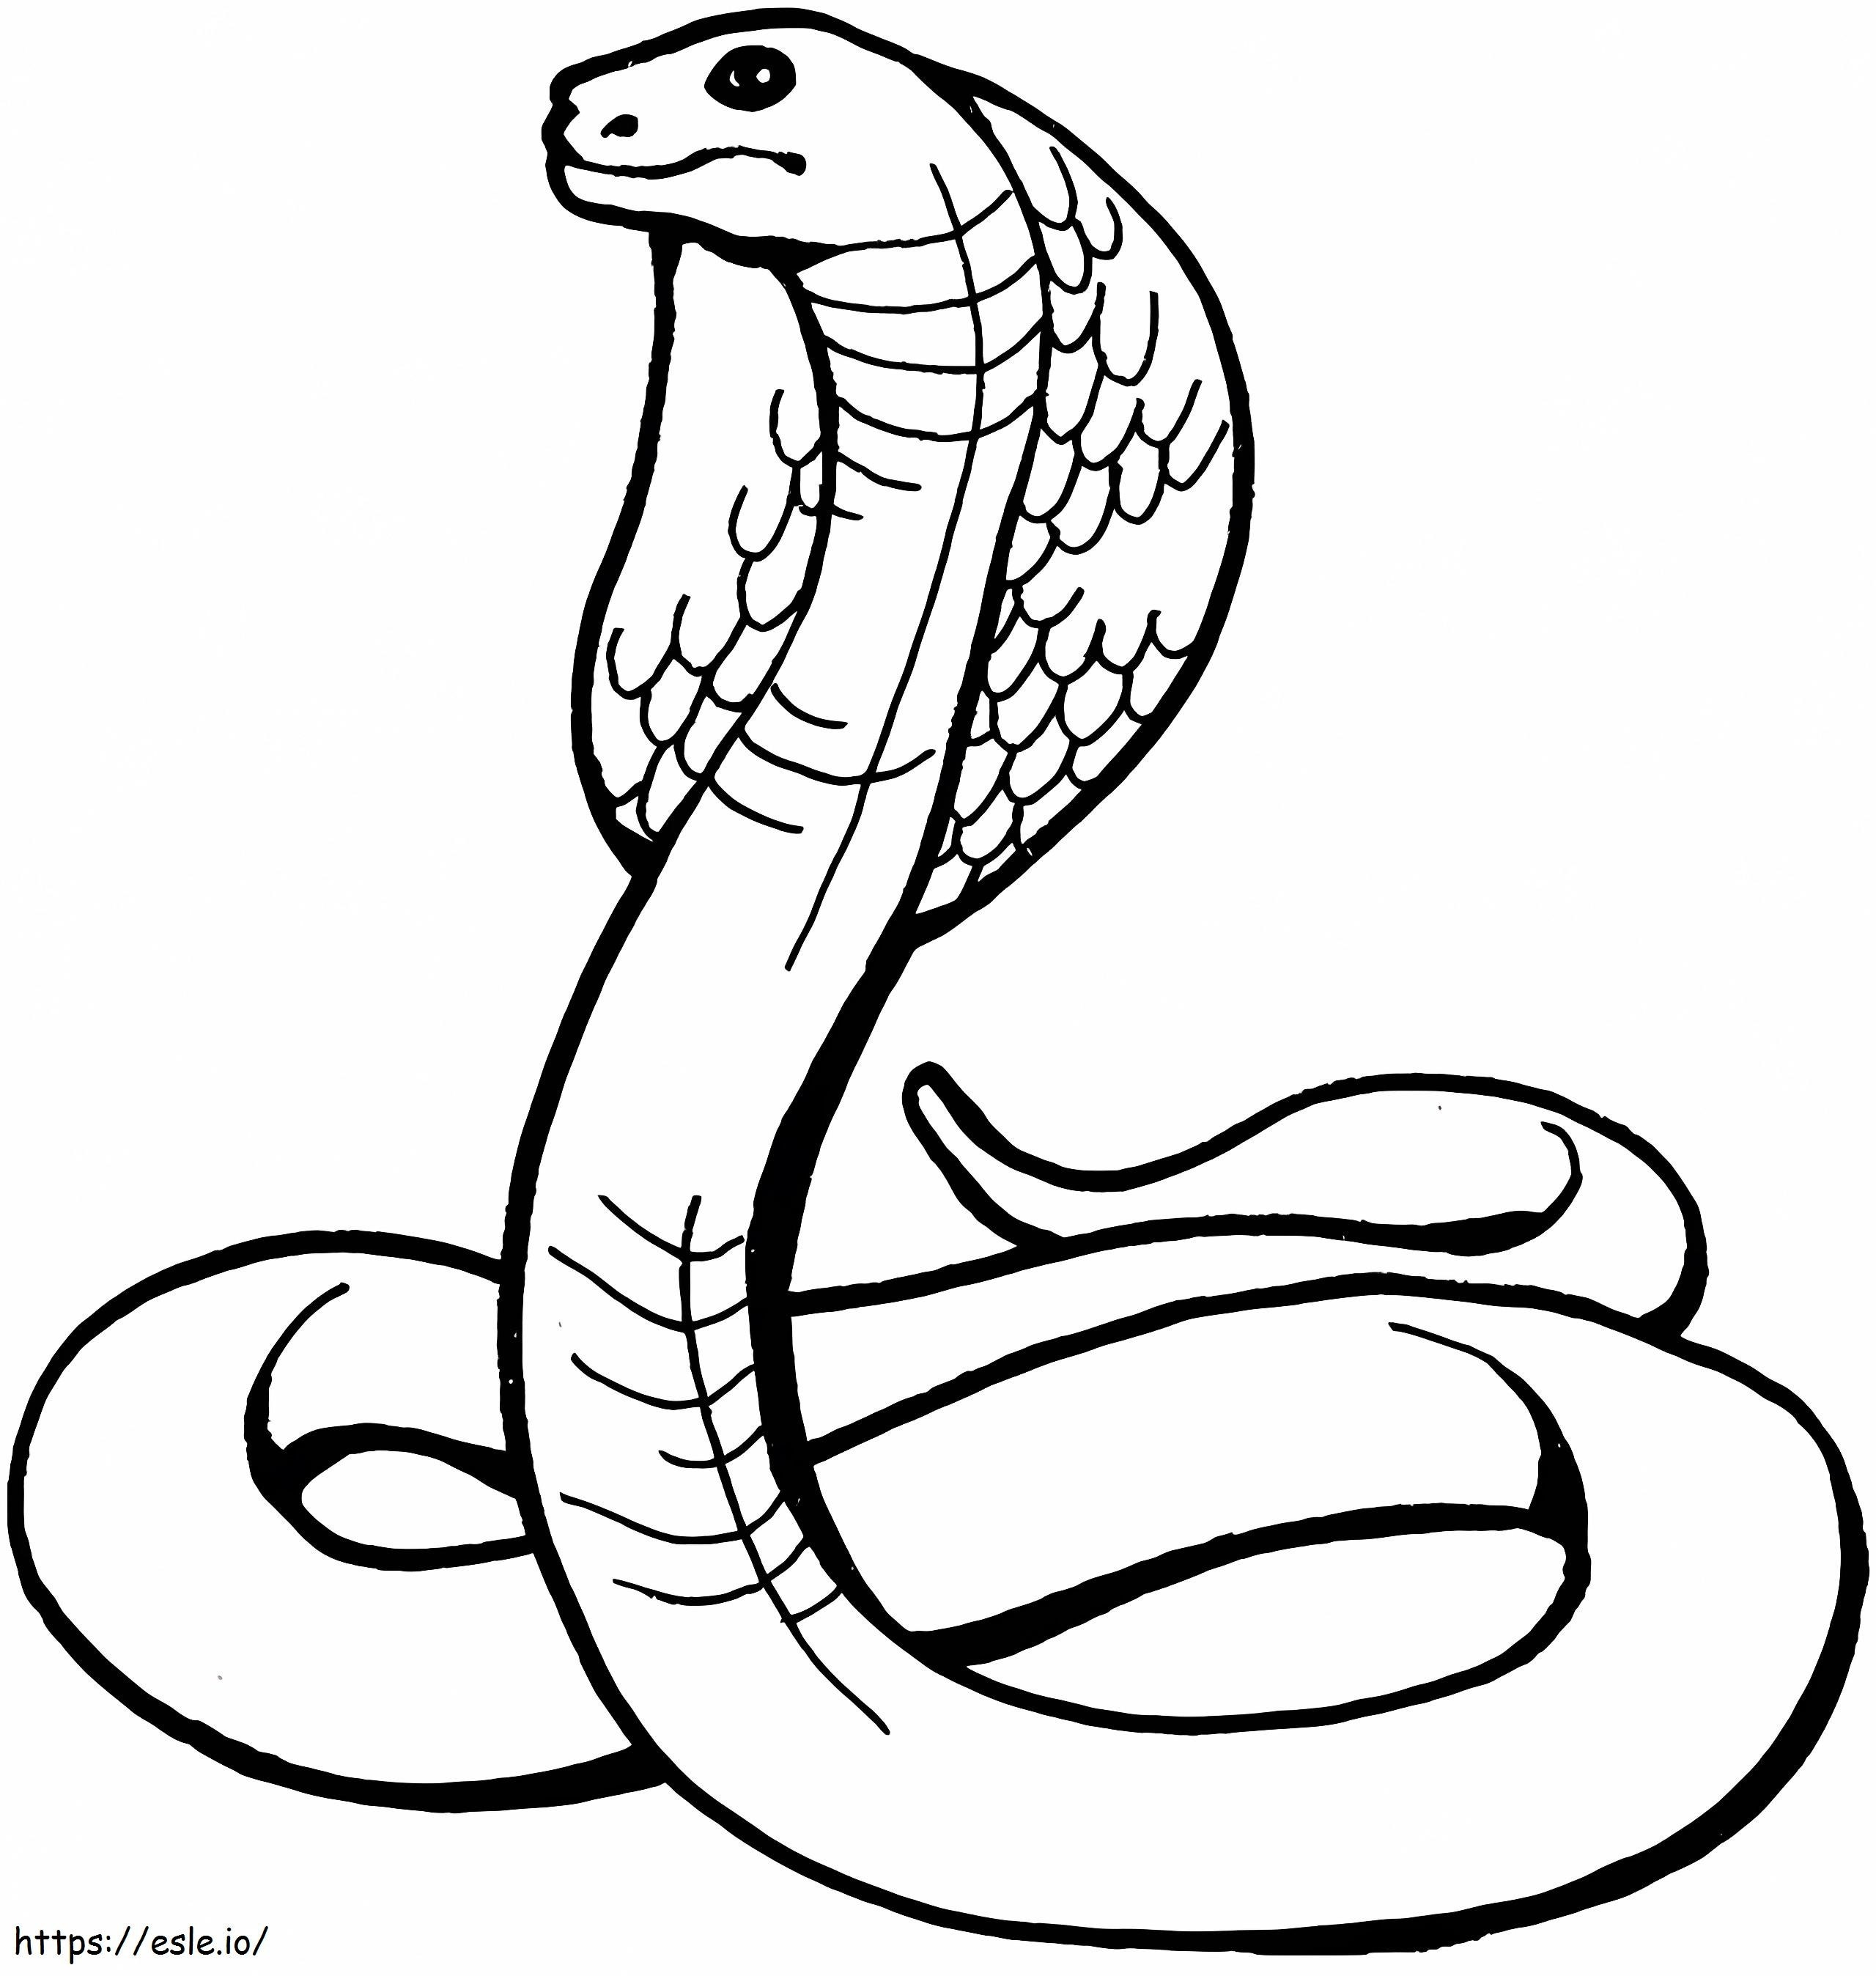 1530675670 Snake Cobra A4 coloring page